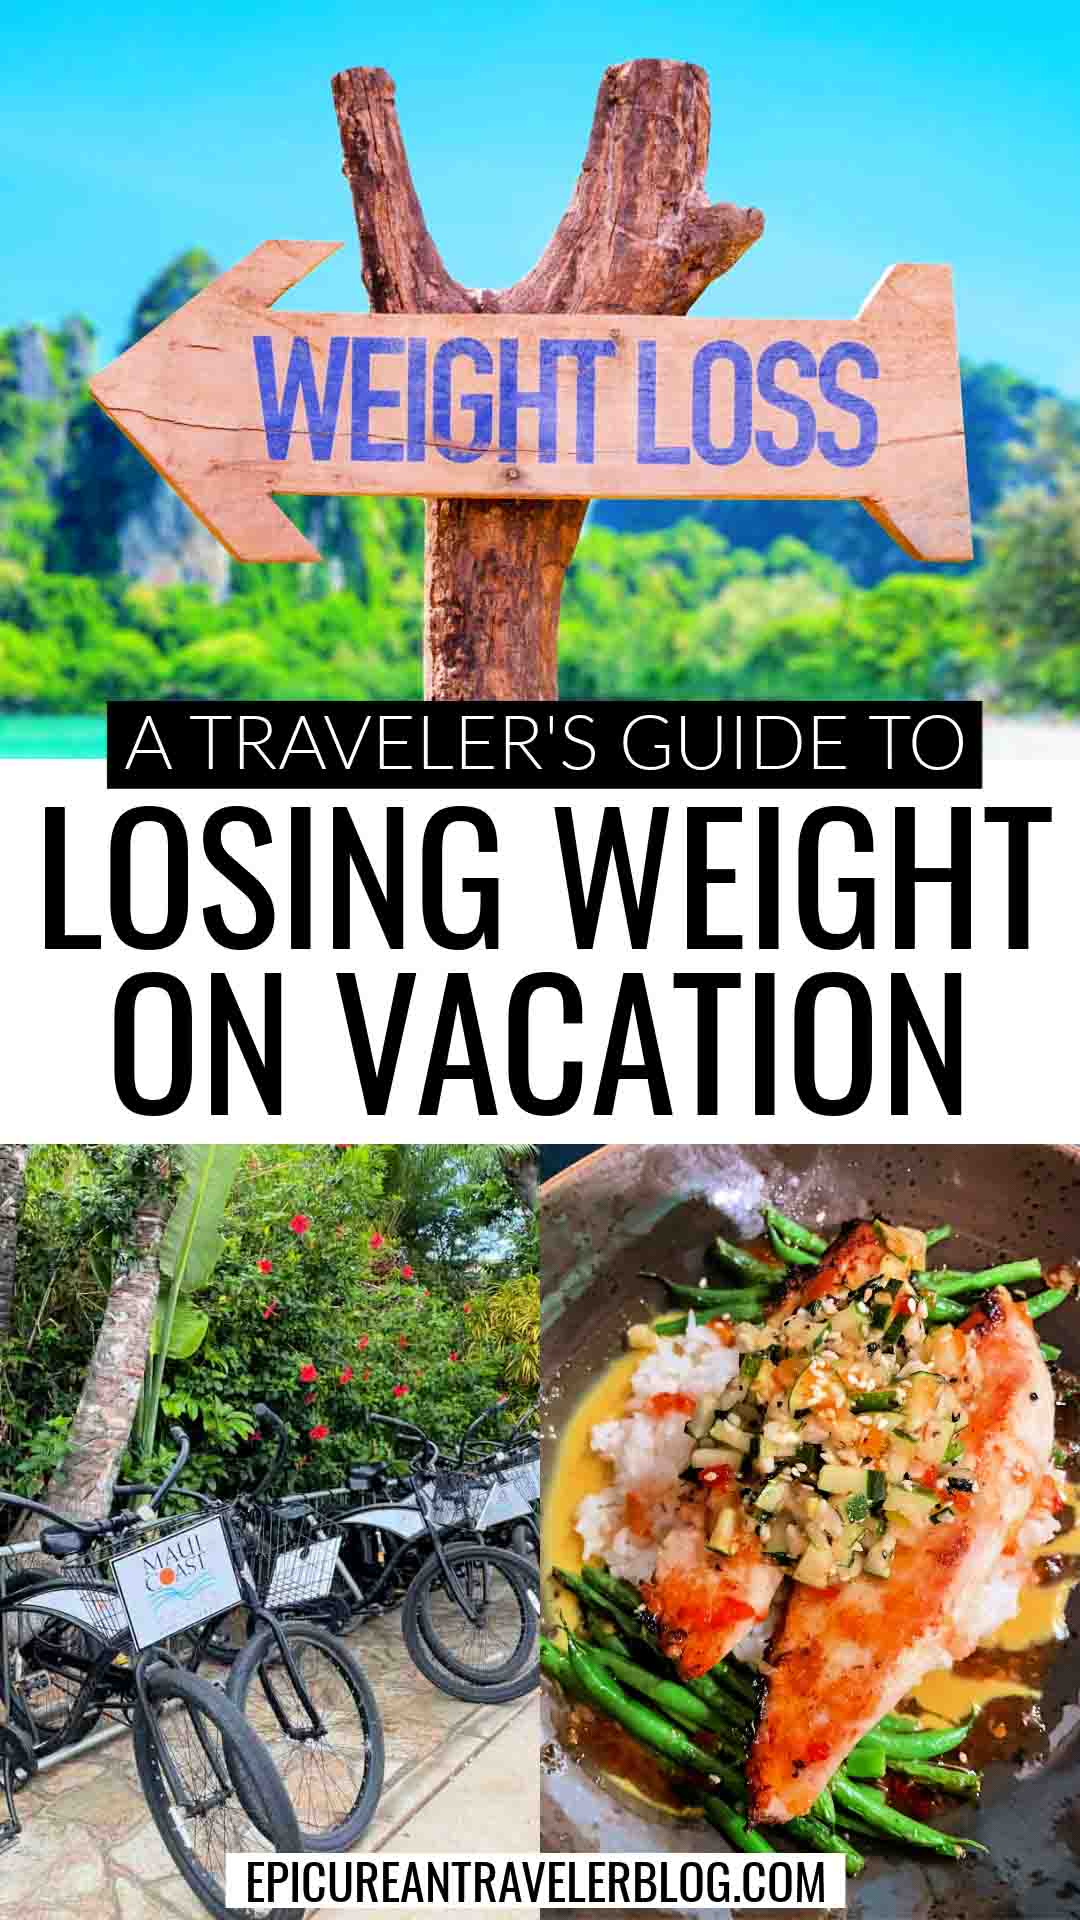 A traveler's guide to losing weight on vacation